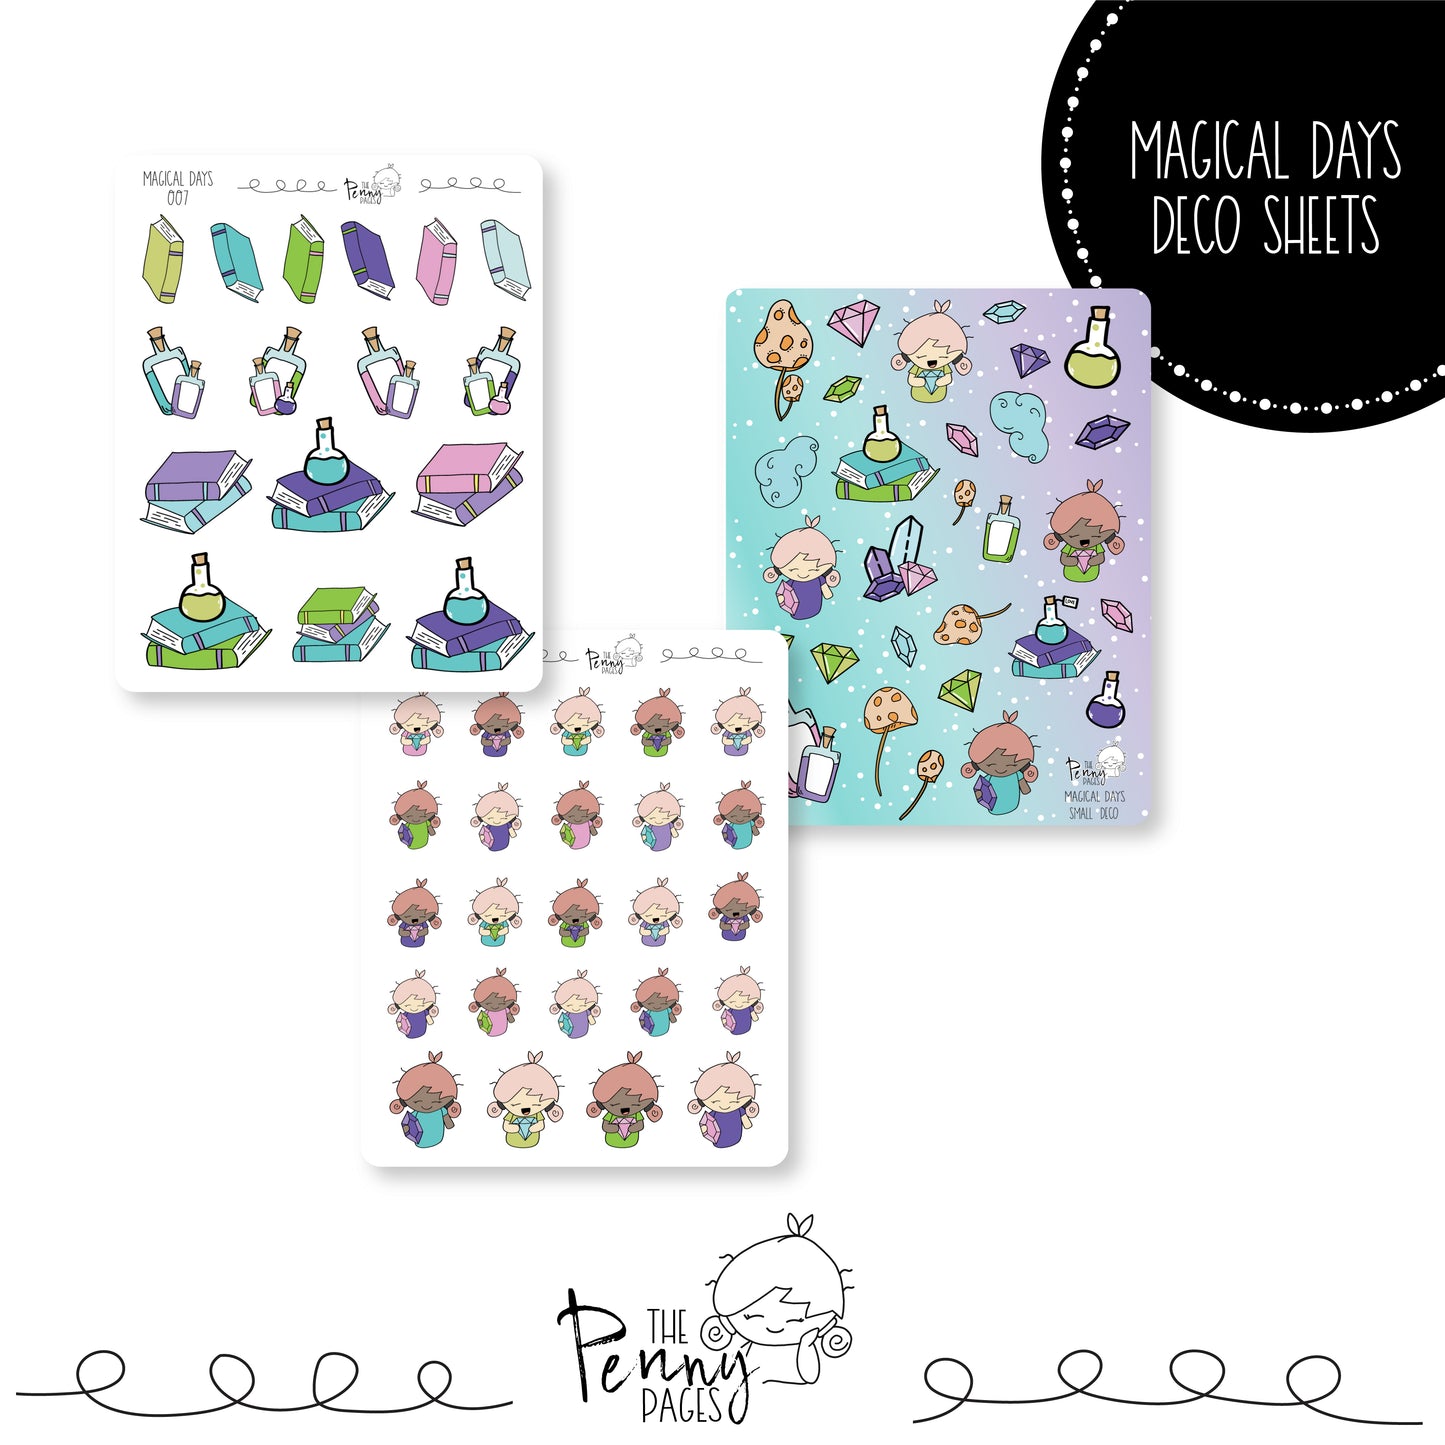 Magical Days Deco Sheets